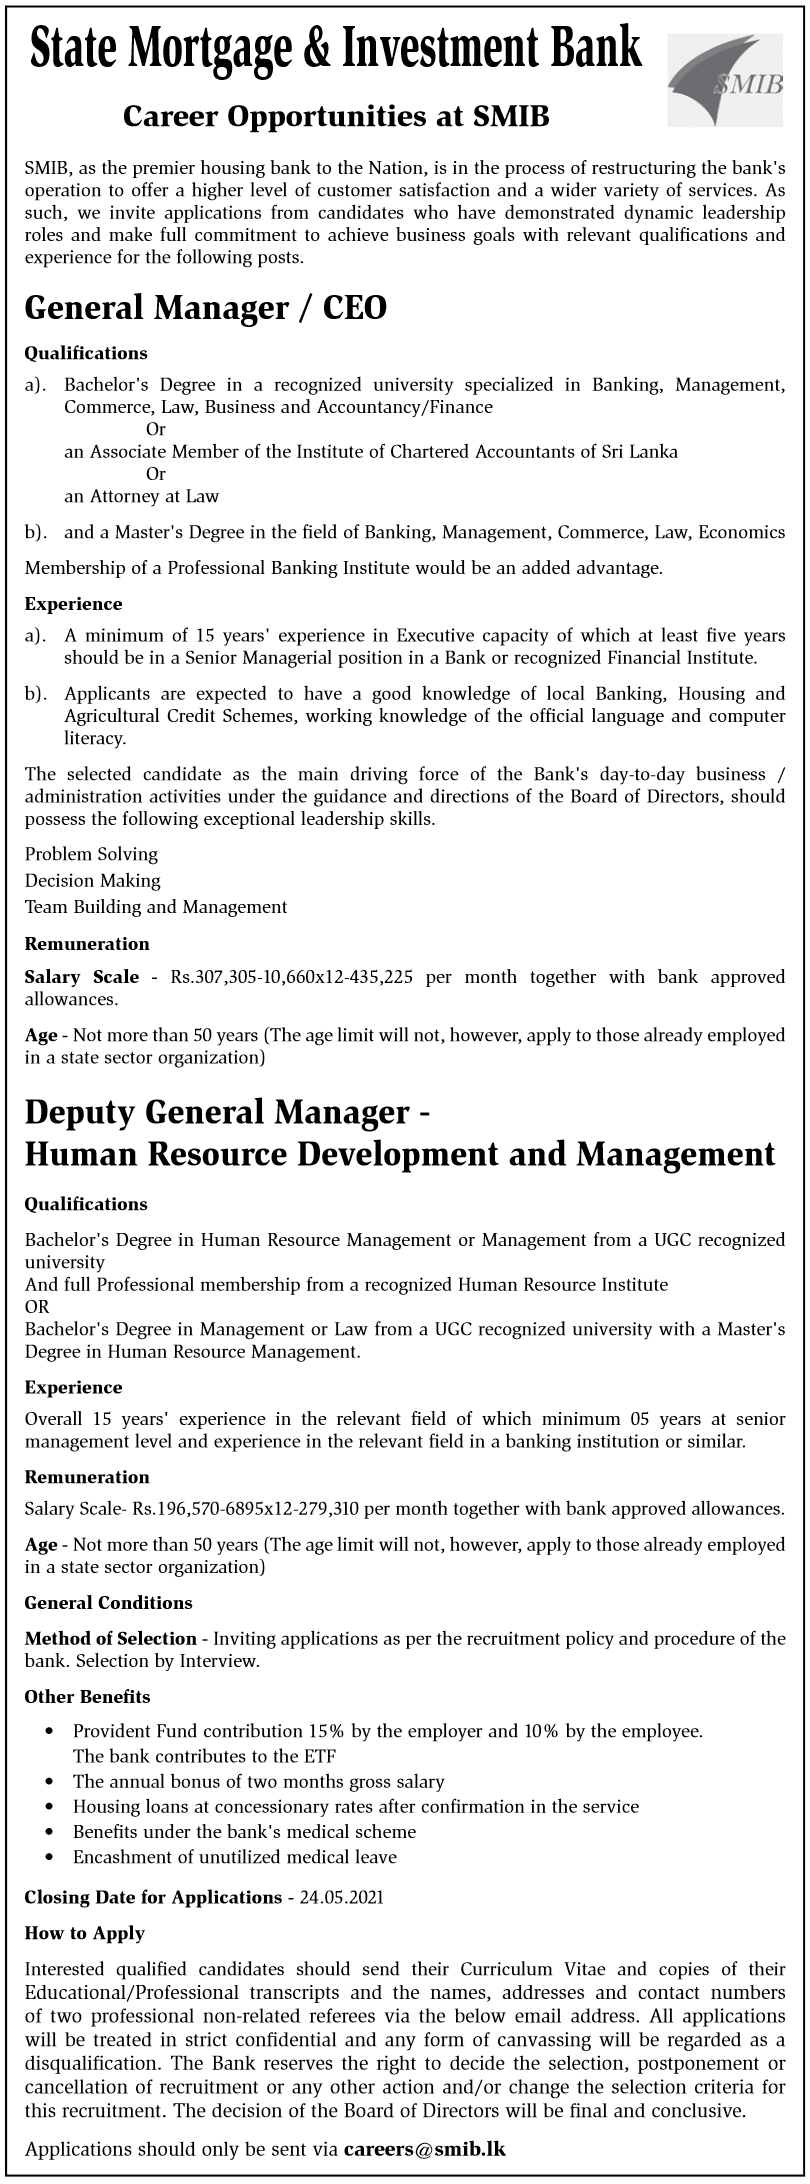 General Manager / CEO, Deputy General Manager (Human Resource Development and Management) – State Mortgage and Investment Bank